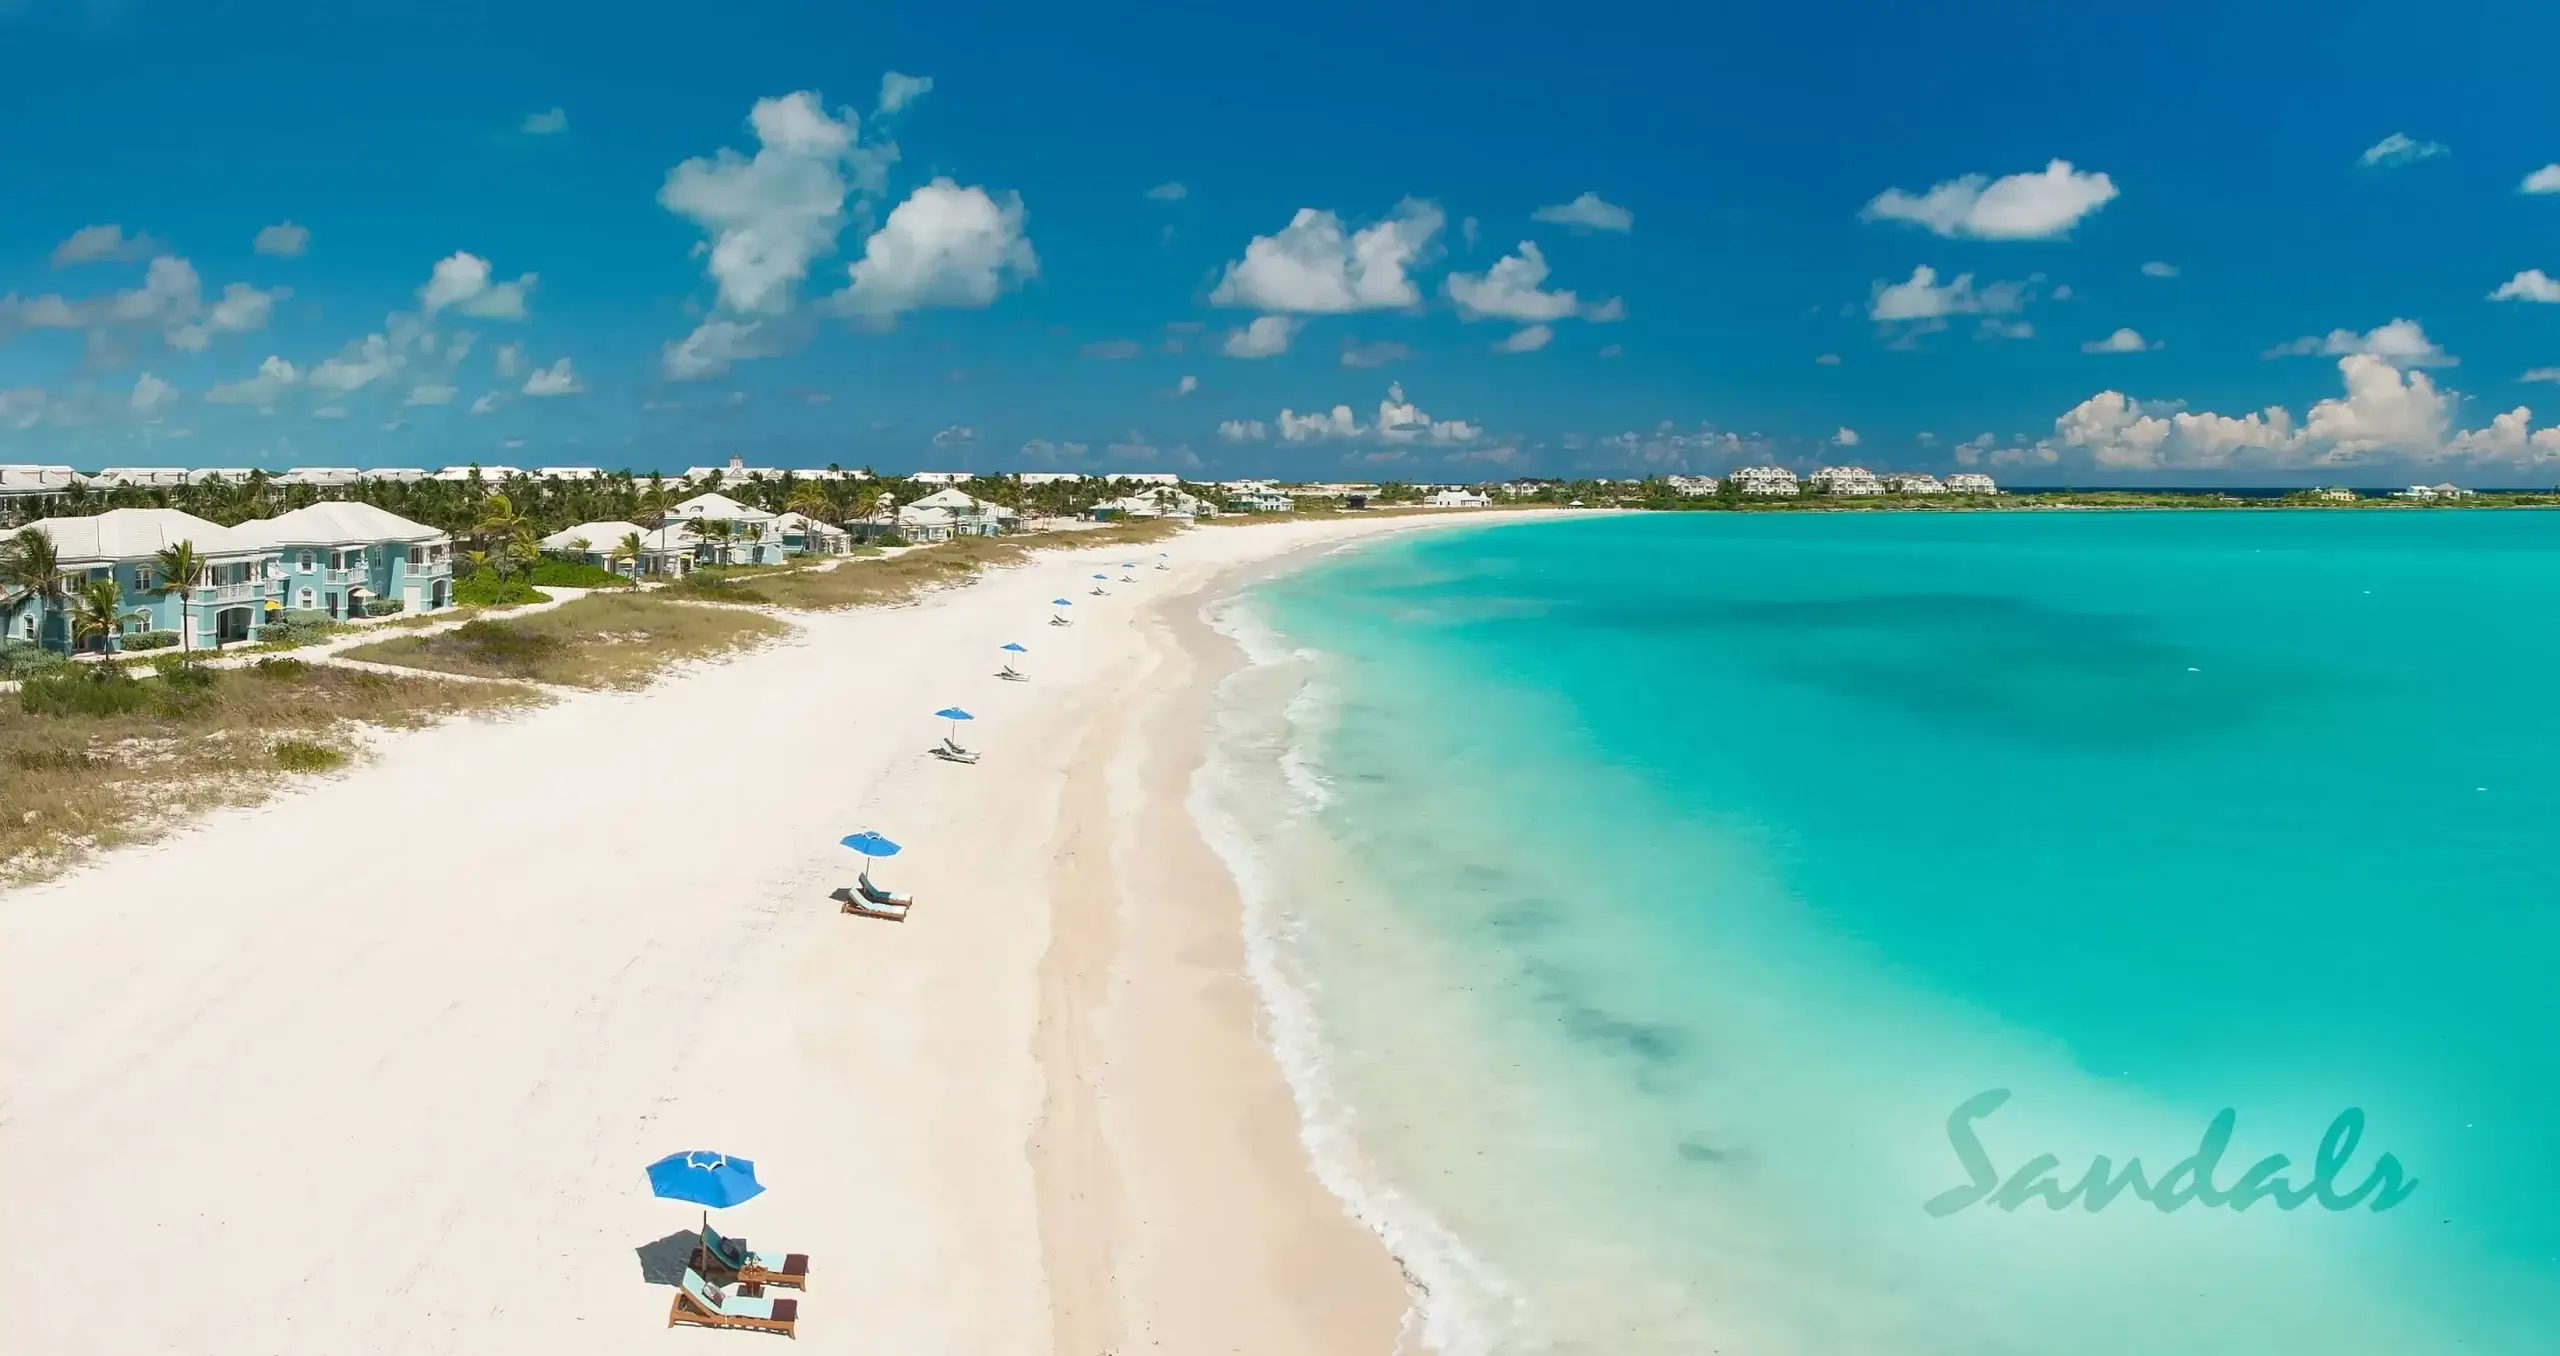 Sandals Emerald Bay in Bahamas white sand beach with clear blue water. 